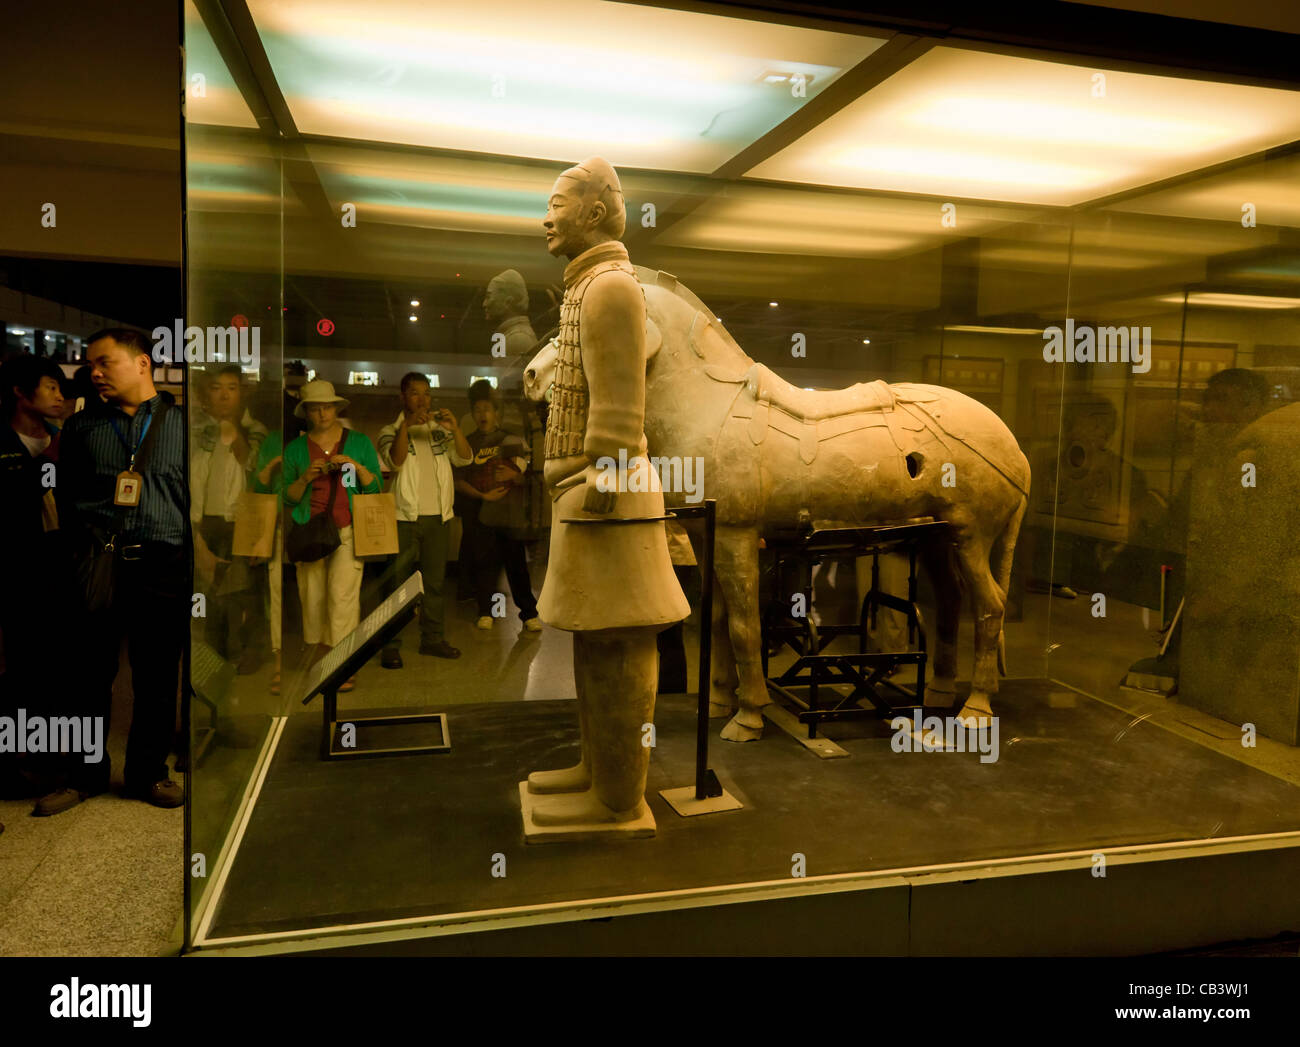 Terracotta Warriors museum glass case soldier and horse Xian, Shaanxi Province, PRC, People's Republic of China, Asia Stock Photo